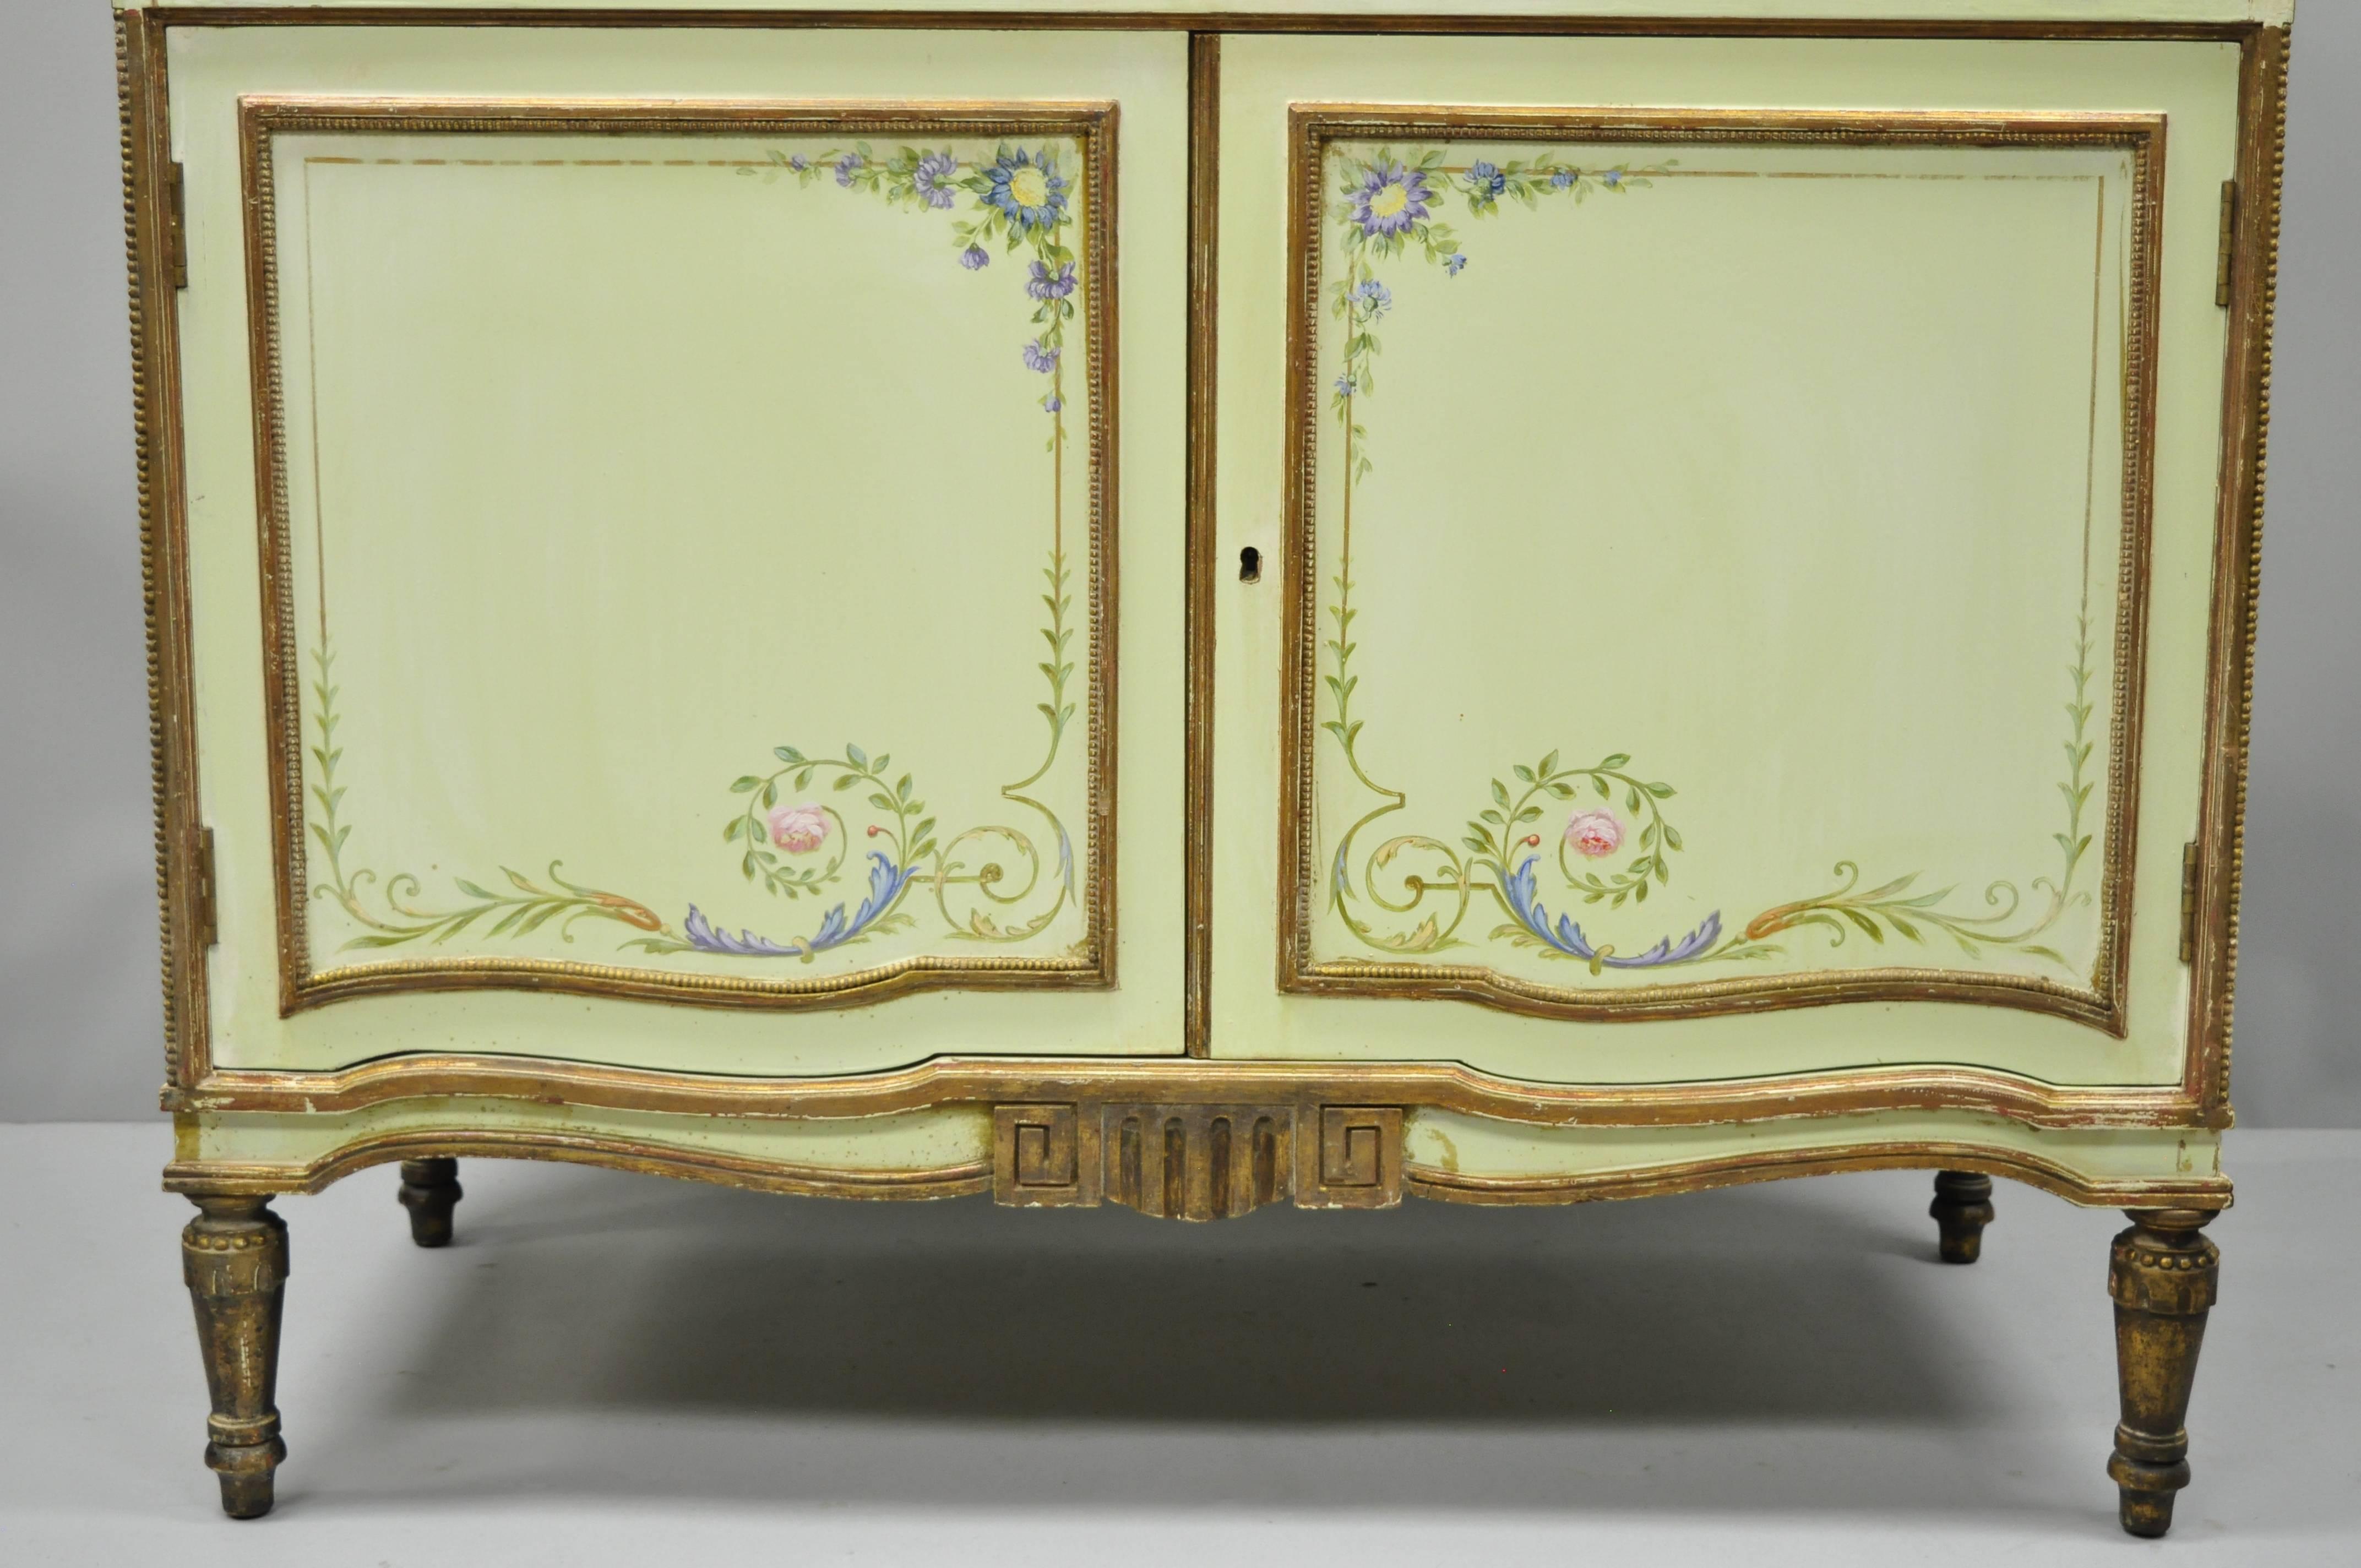 American Antique Adams Style Green Painted Chest of Drawers Dresser by New York Galleries